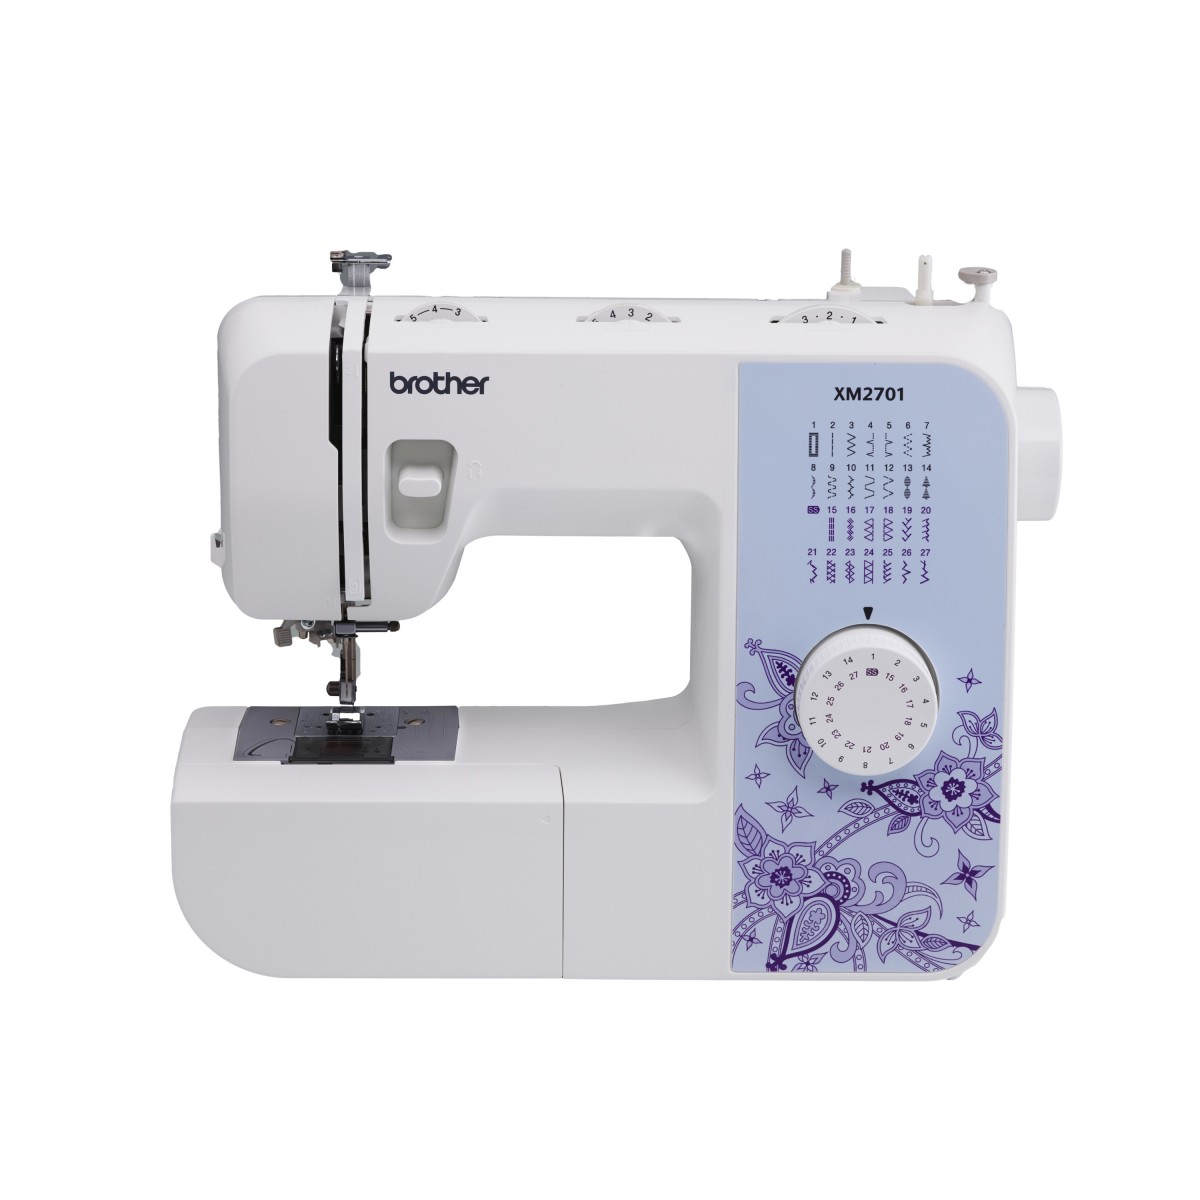 Brother XM2701 Review - Why this Sewing Machine Model is for You!